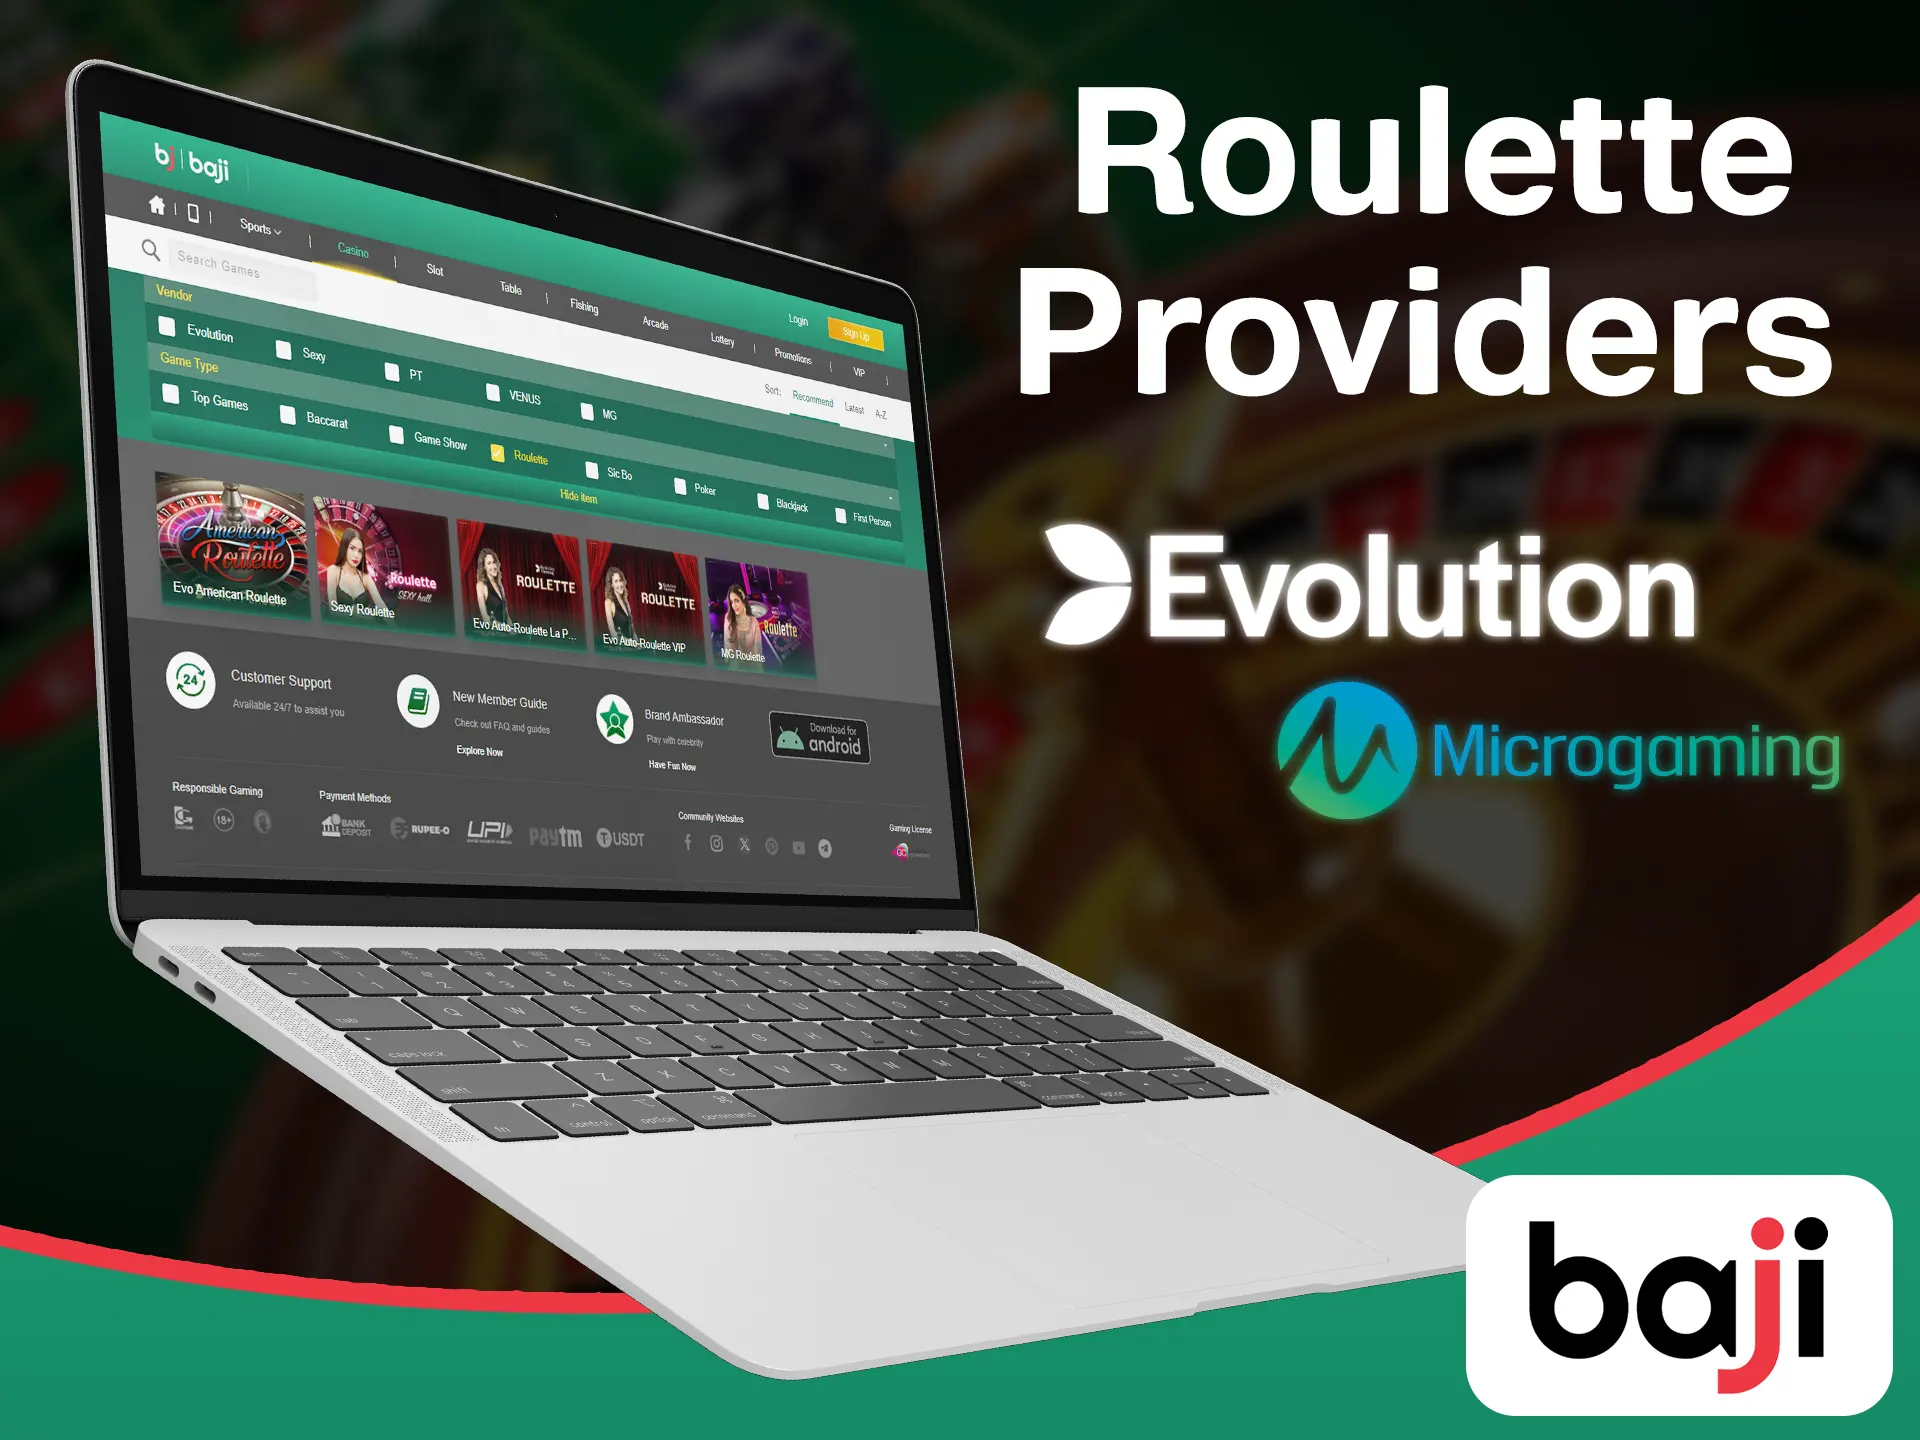 Try roulette from each available provider at the Baji.